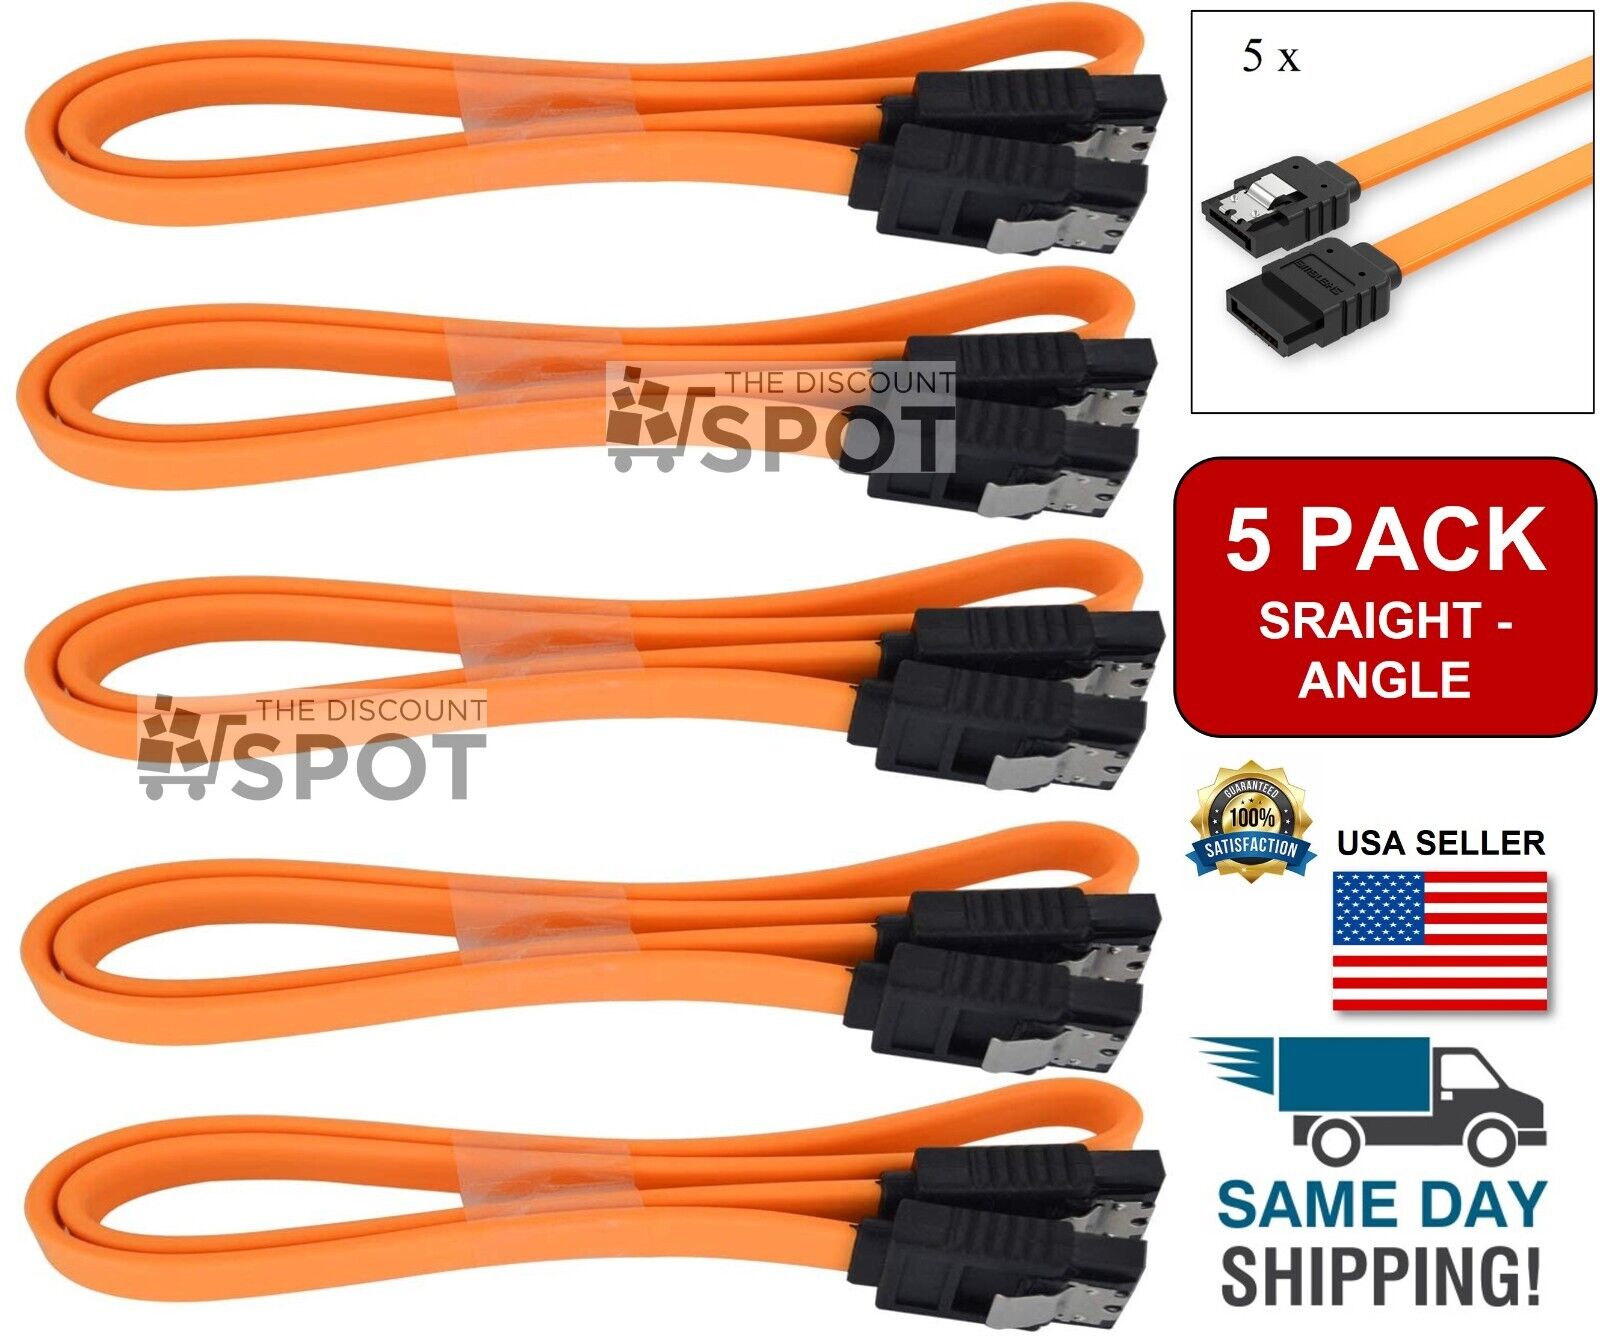 5-Pack 18” SATA III Cables Straight to Straight Angle SSD HDD Hard Drive Orange